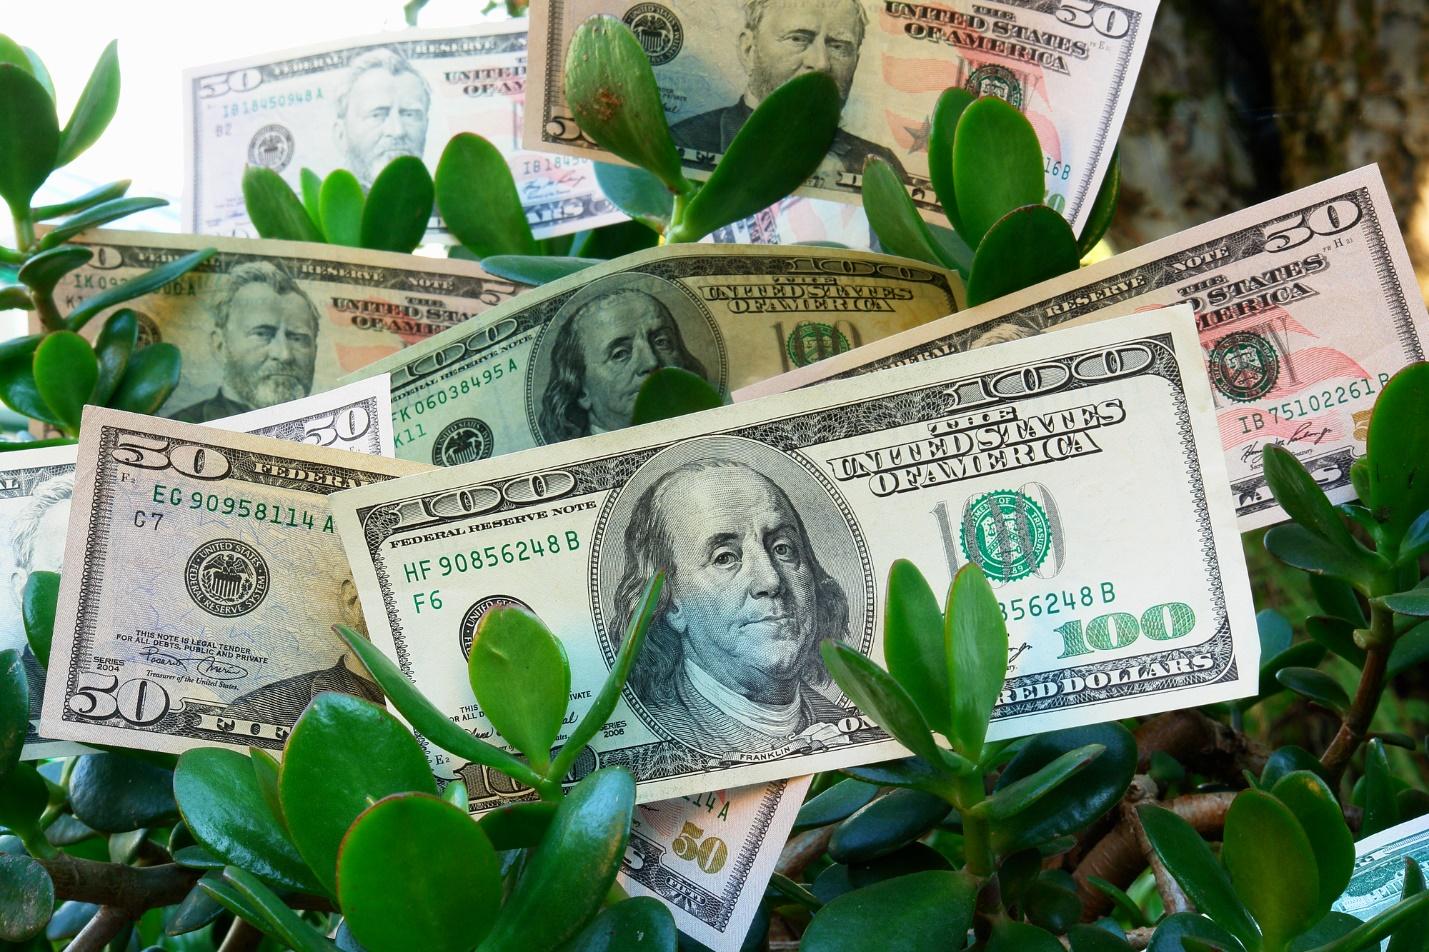 Money bills growing on a plant

Description automatically generated